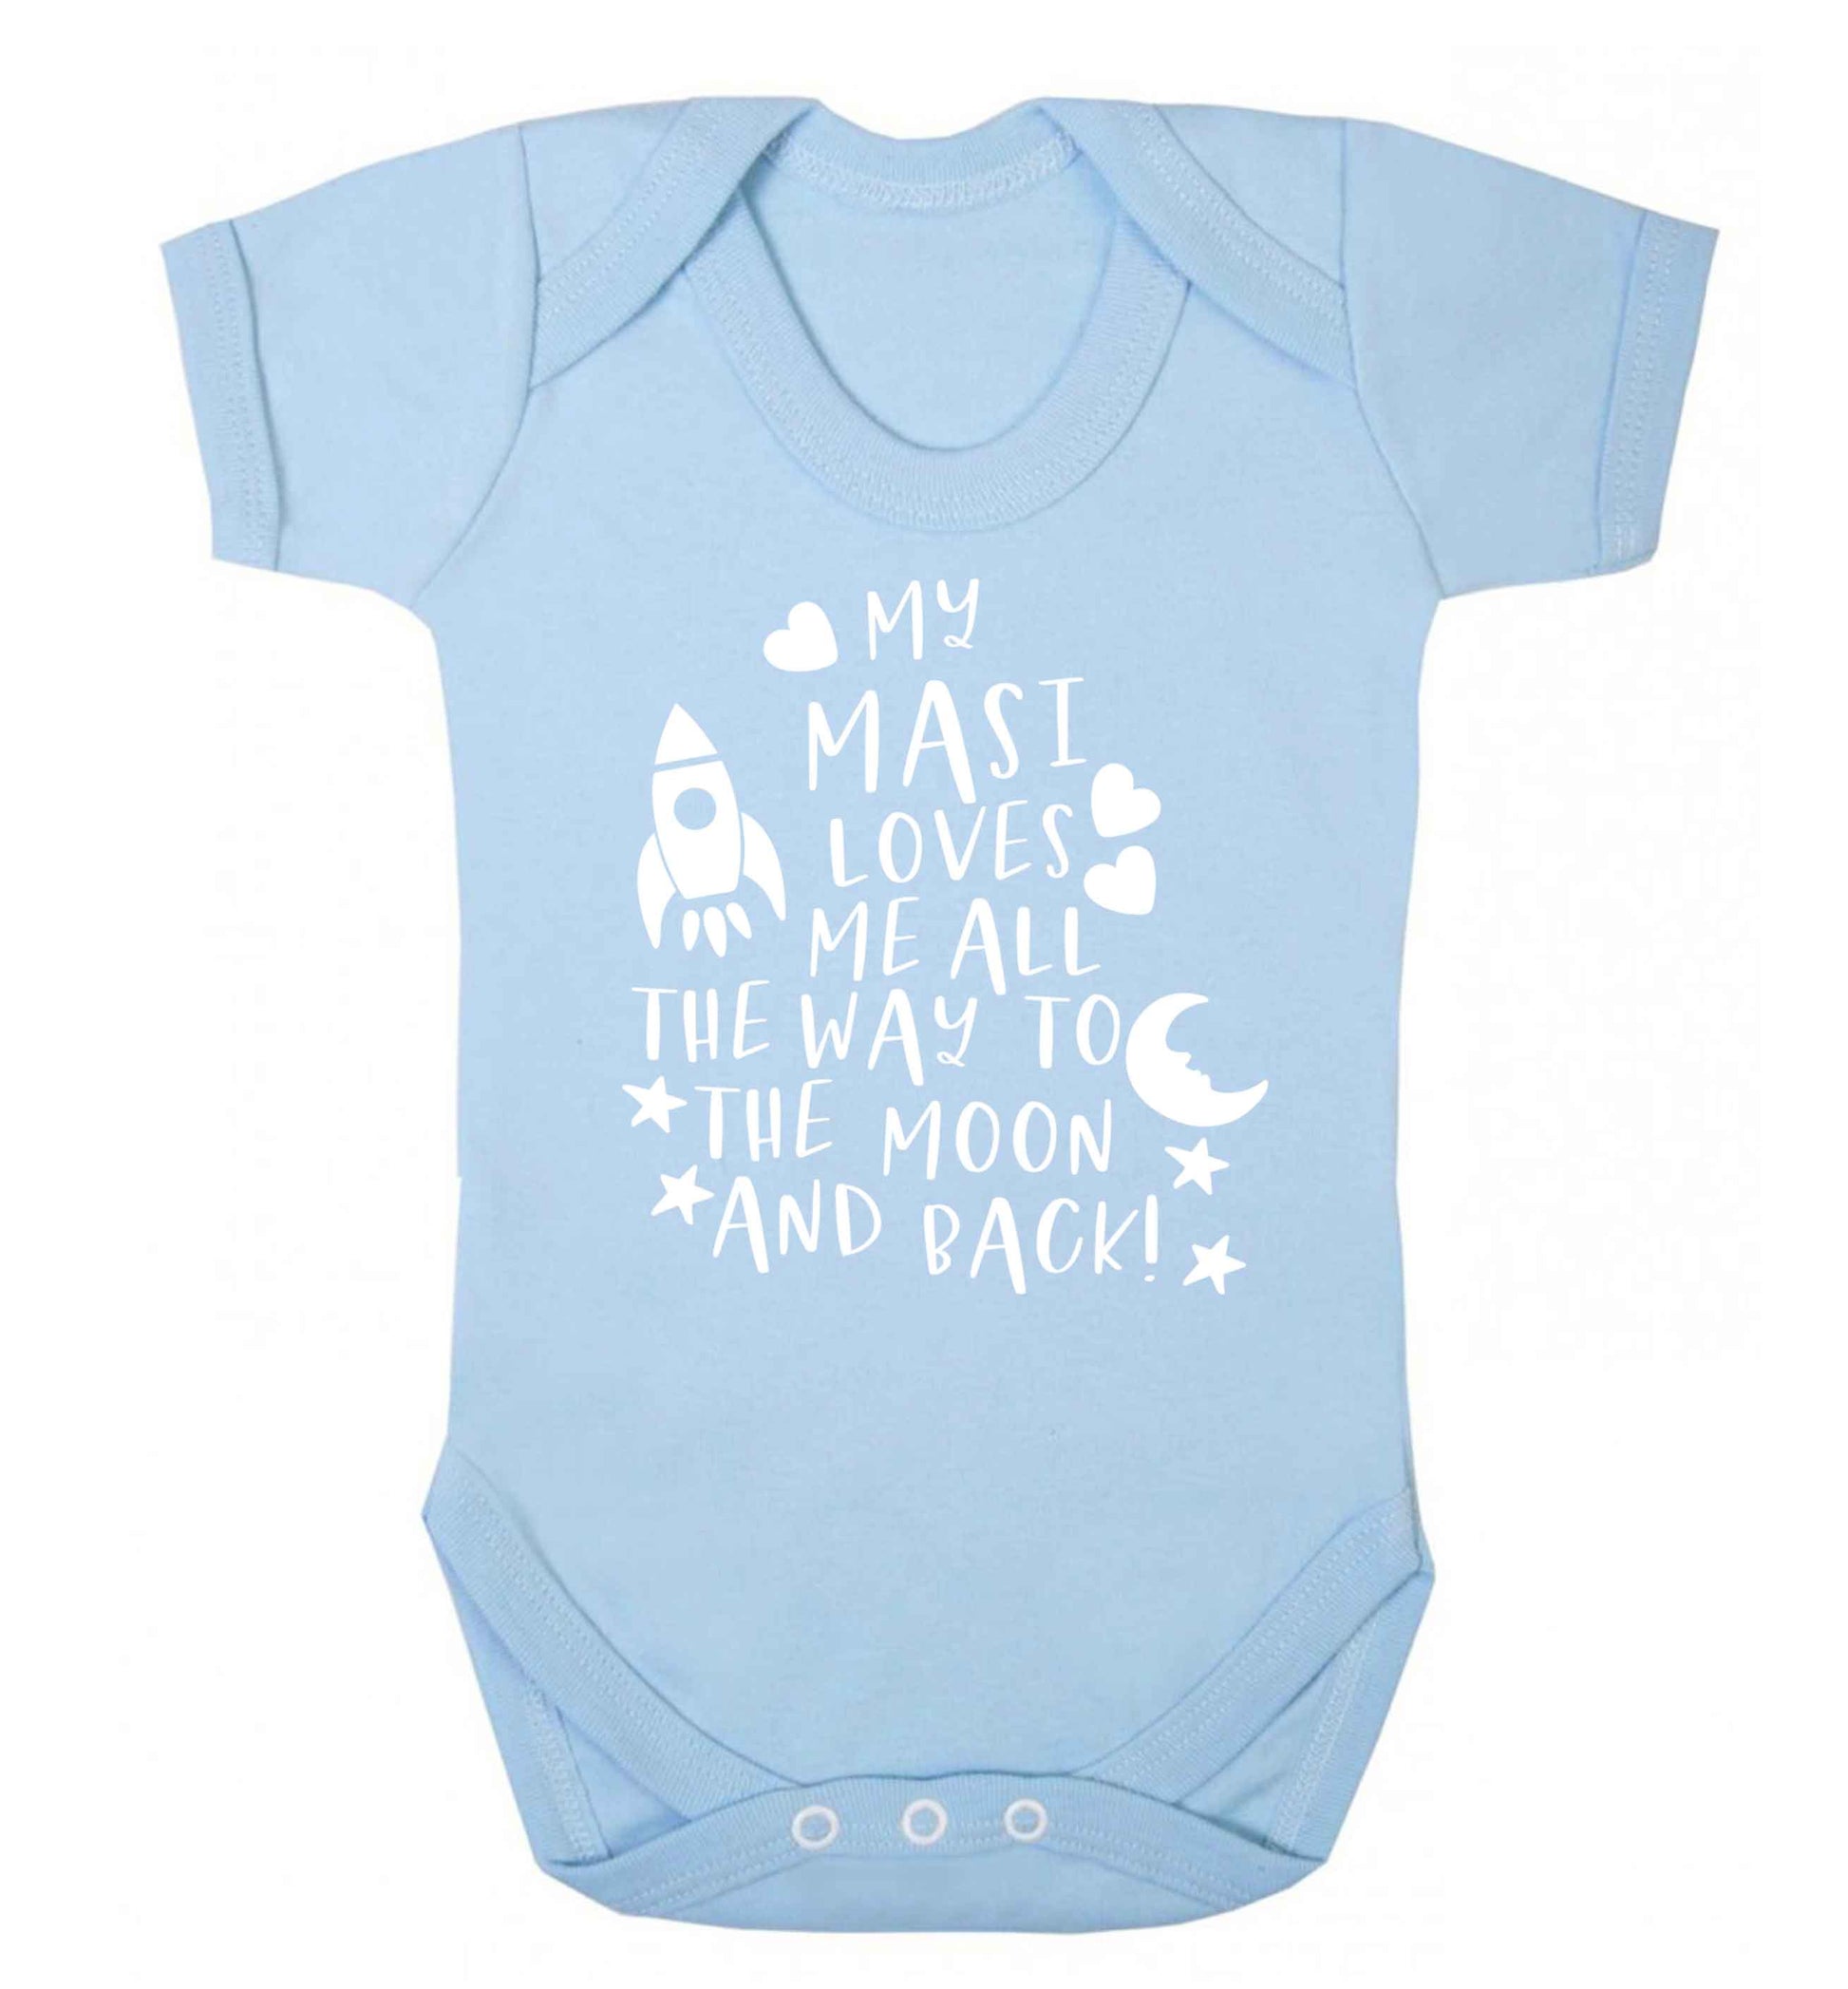 My masi loves me all the way to the moon and back Baby Vest pale blue 18-24 months